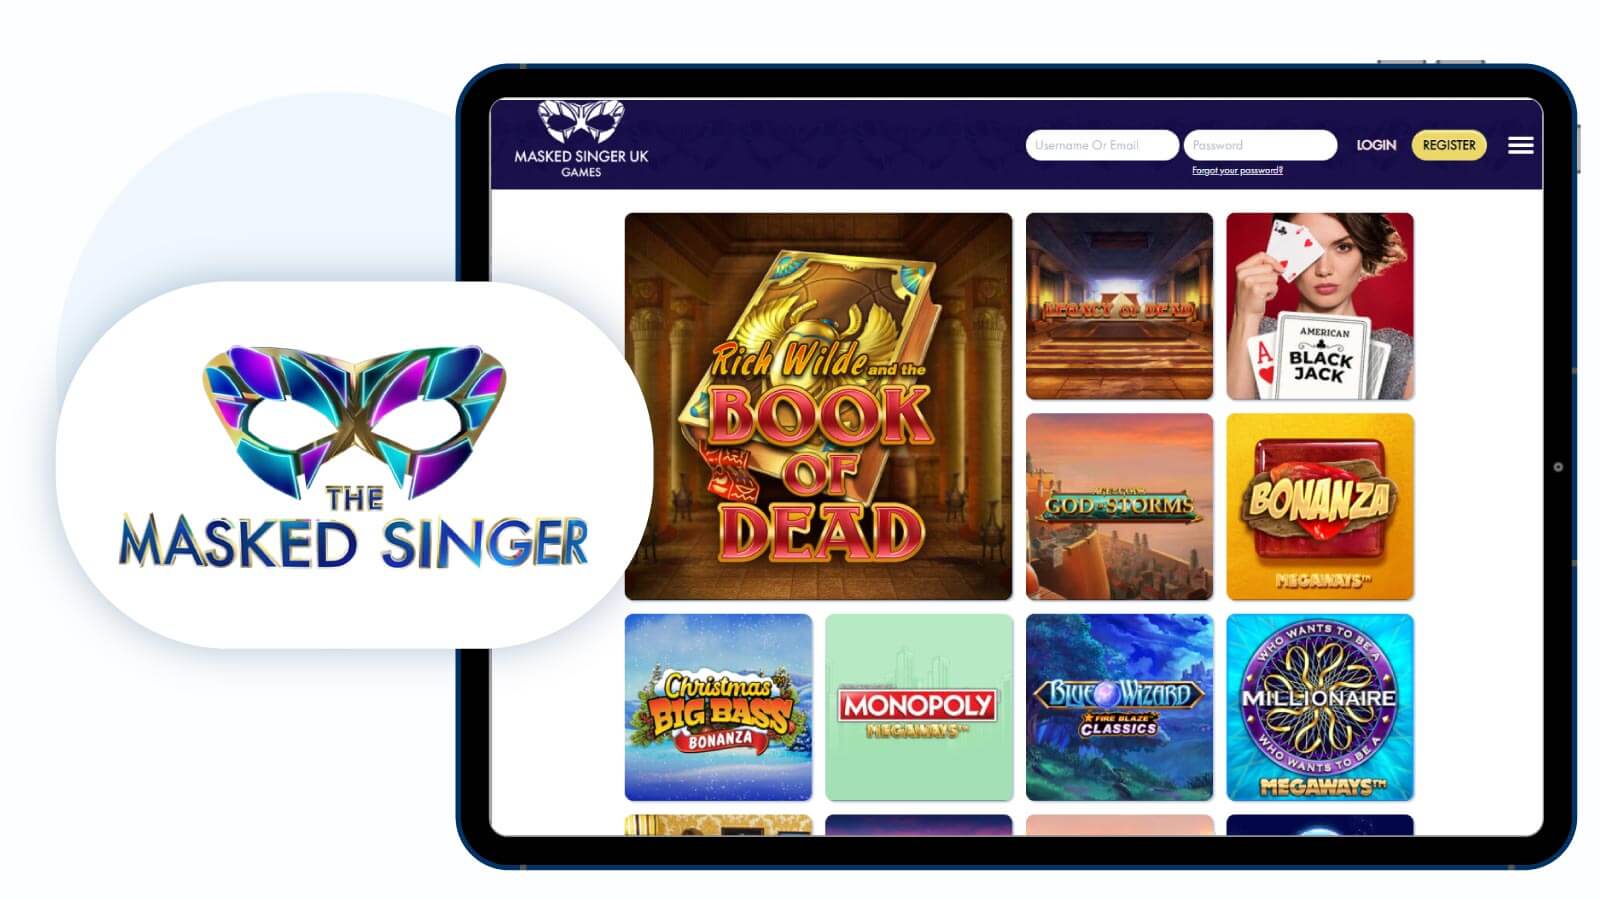 Masked Singer Games Casino – Deposit with Trusty, grab 125 Free Spins